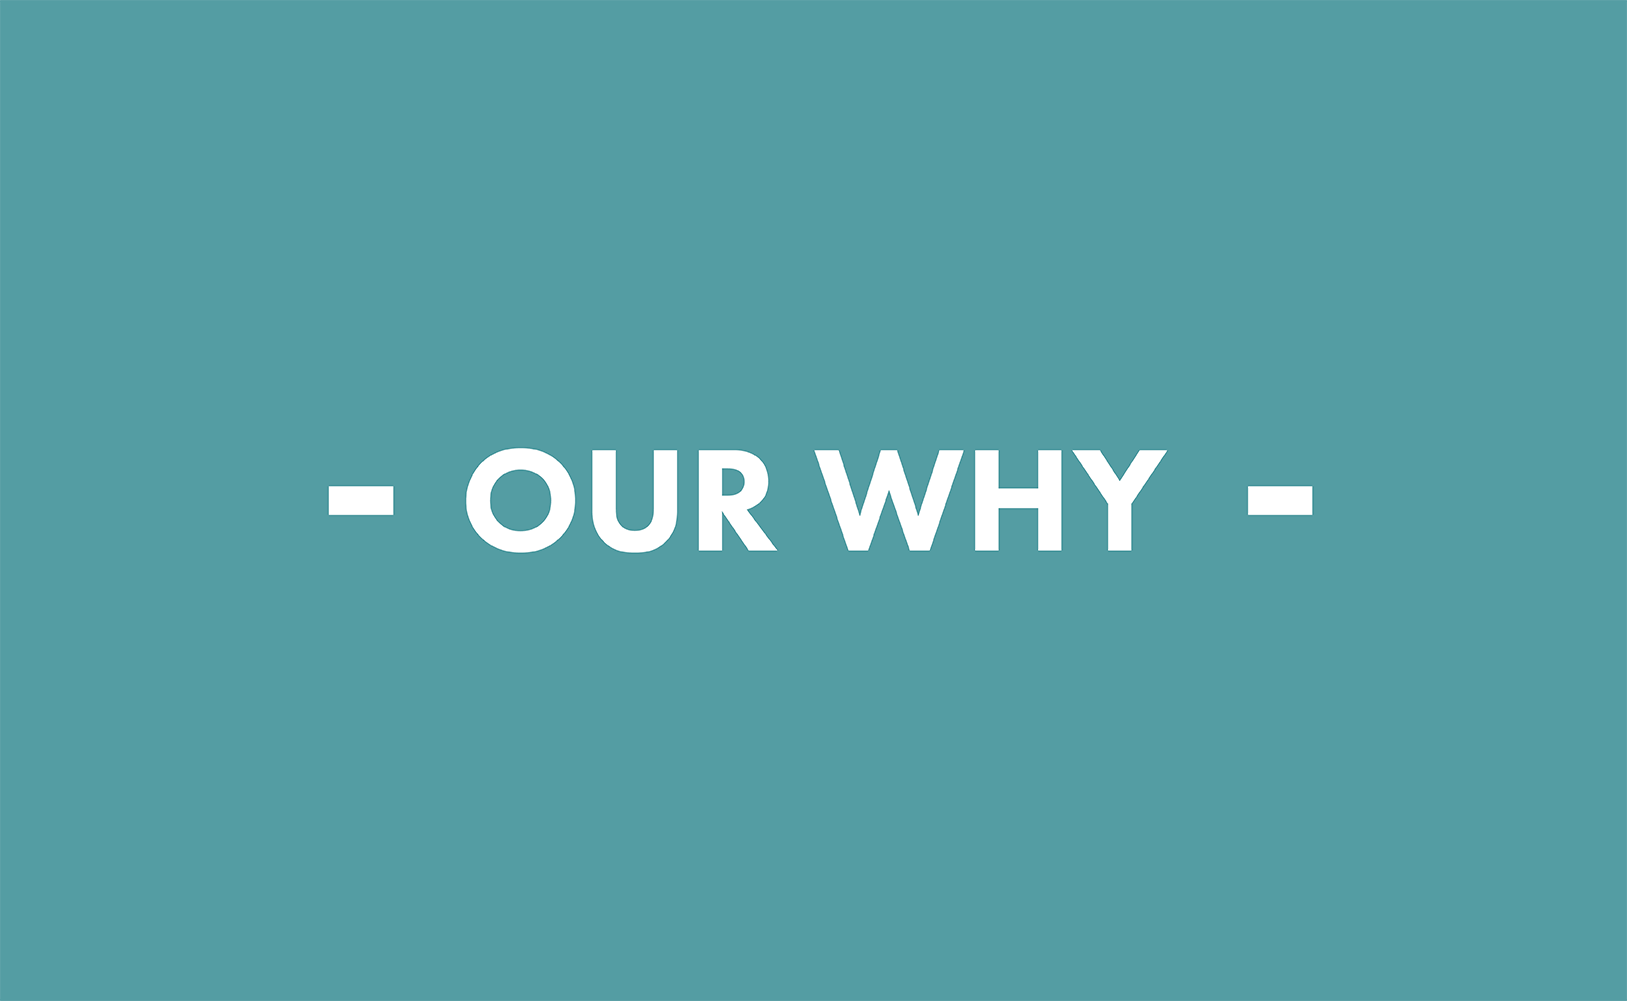 Our Why